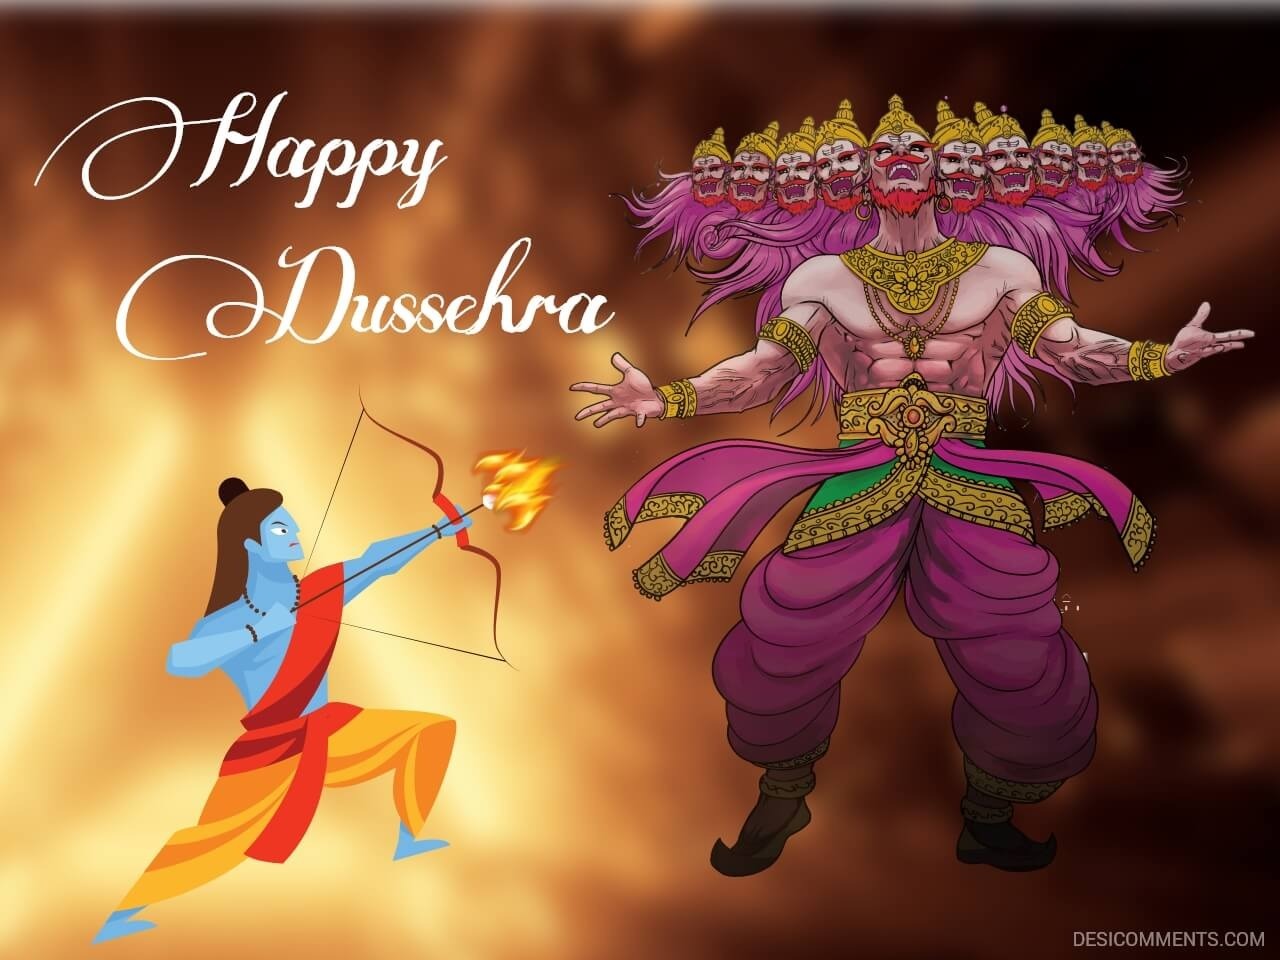 220+ Dussehra Images, Pictures, Photos - Page 3